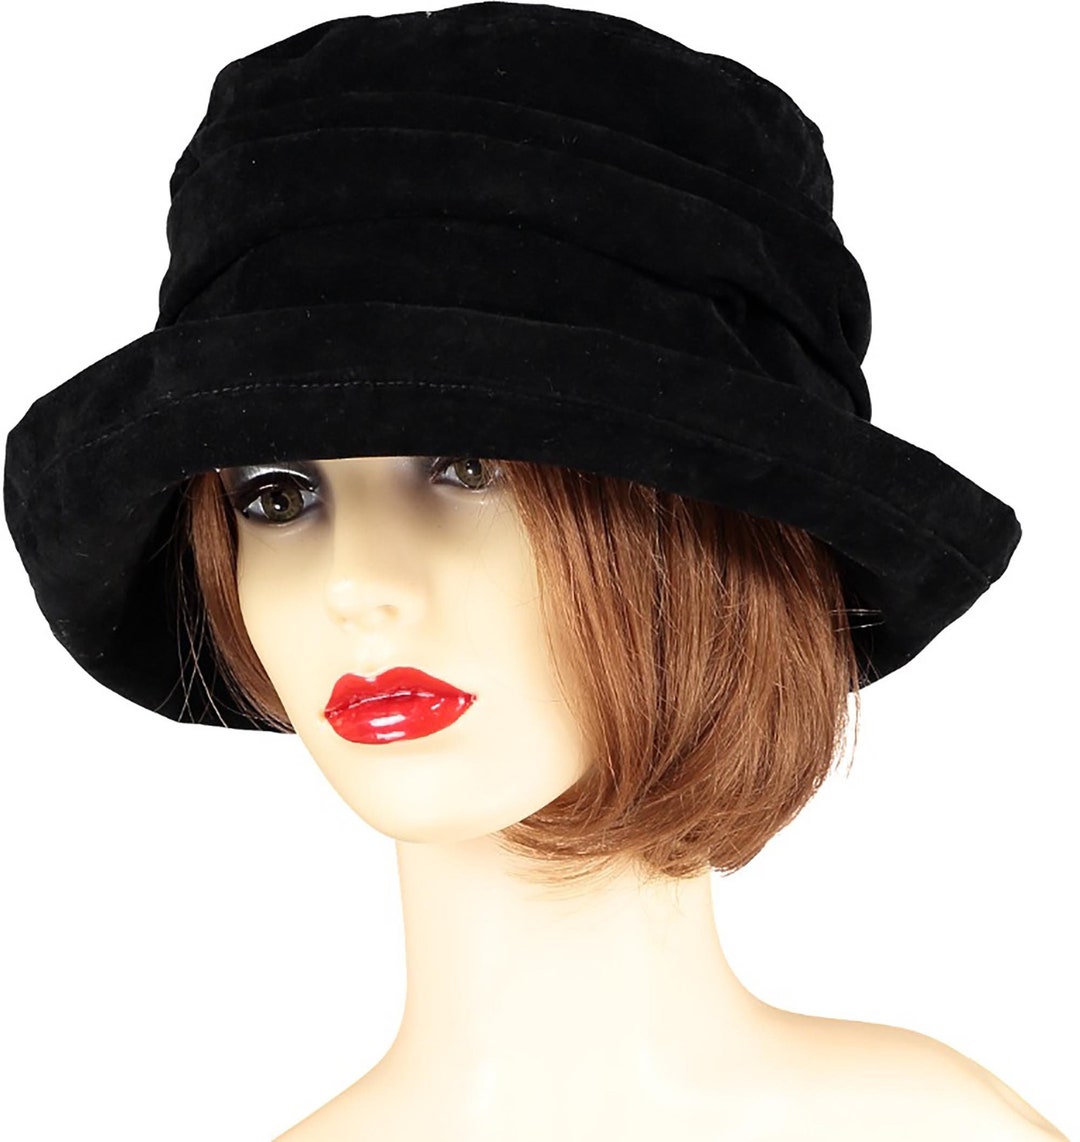 Chic Black Winter Fashion Hat for Women, Smart Autumn / Fall Style ...